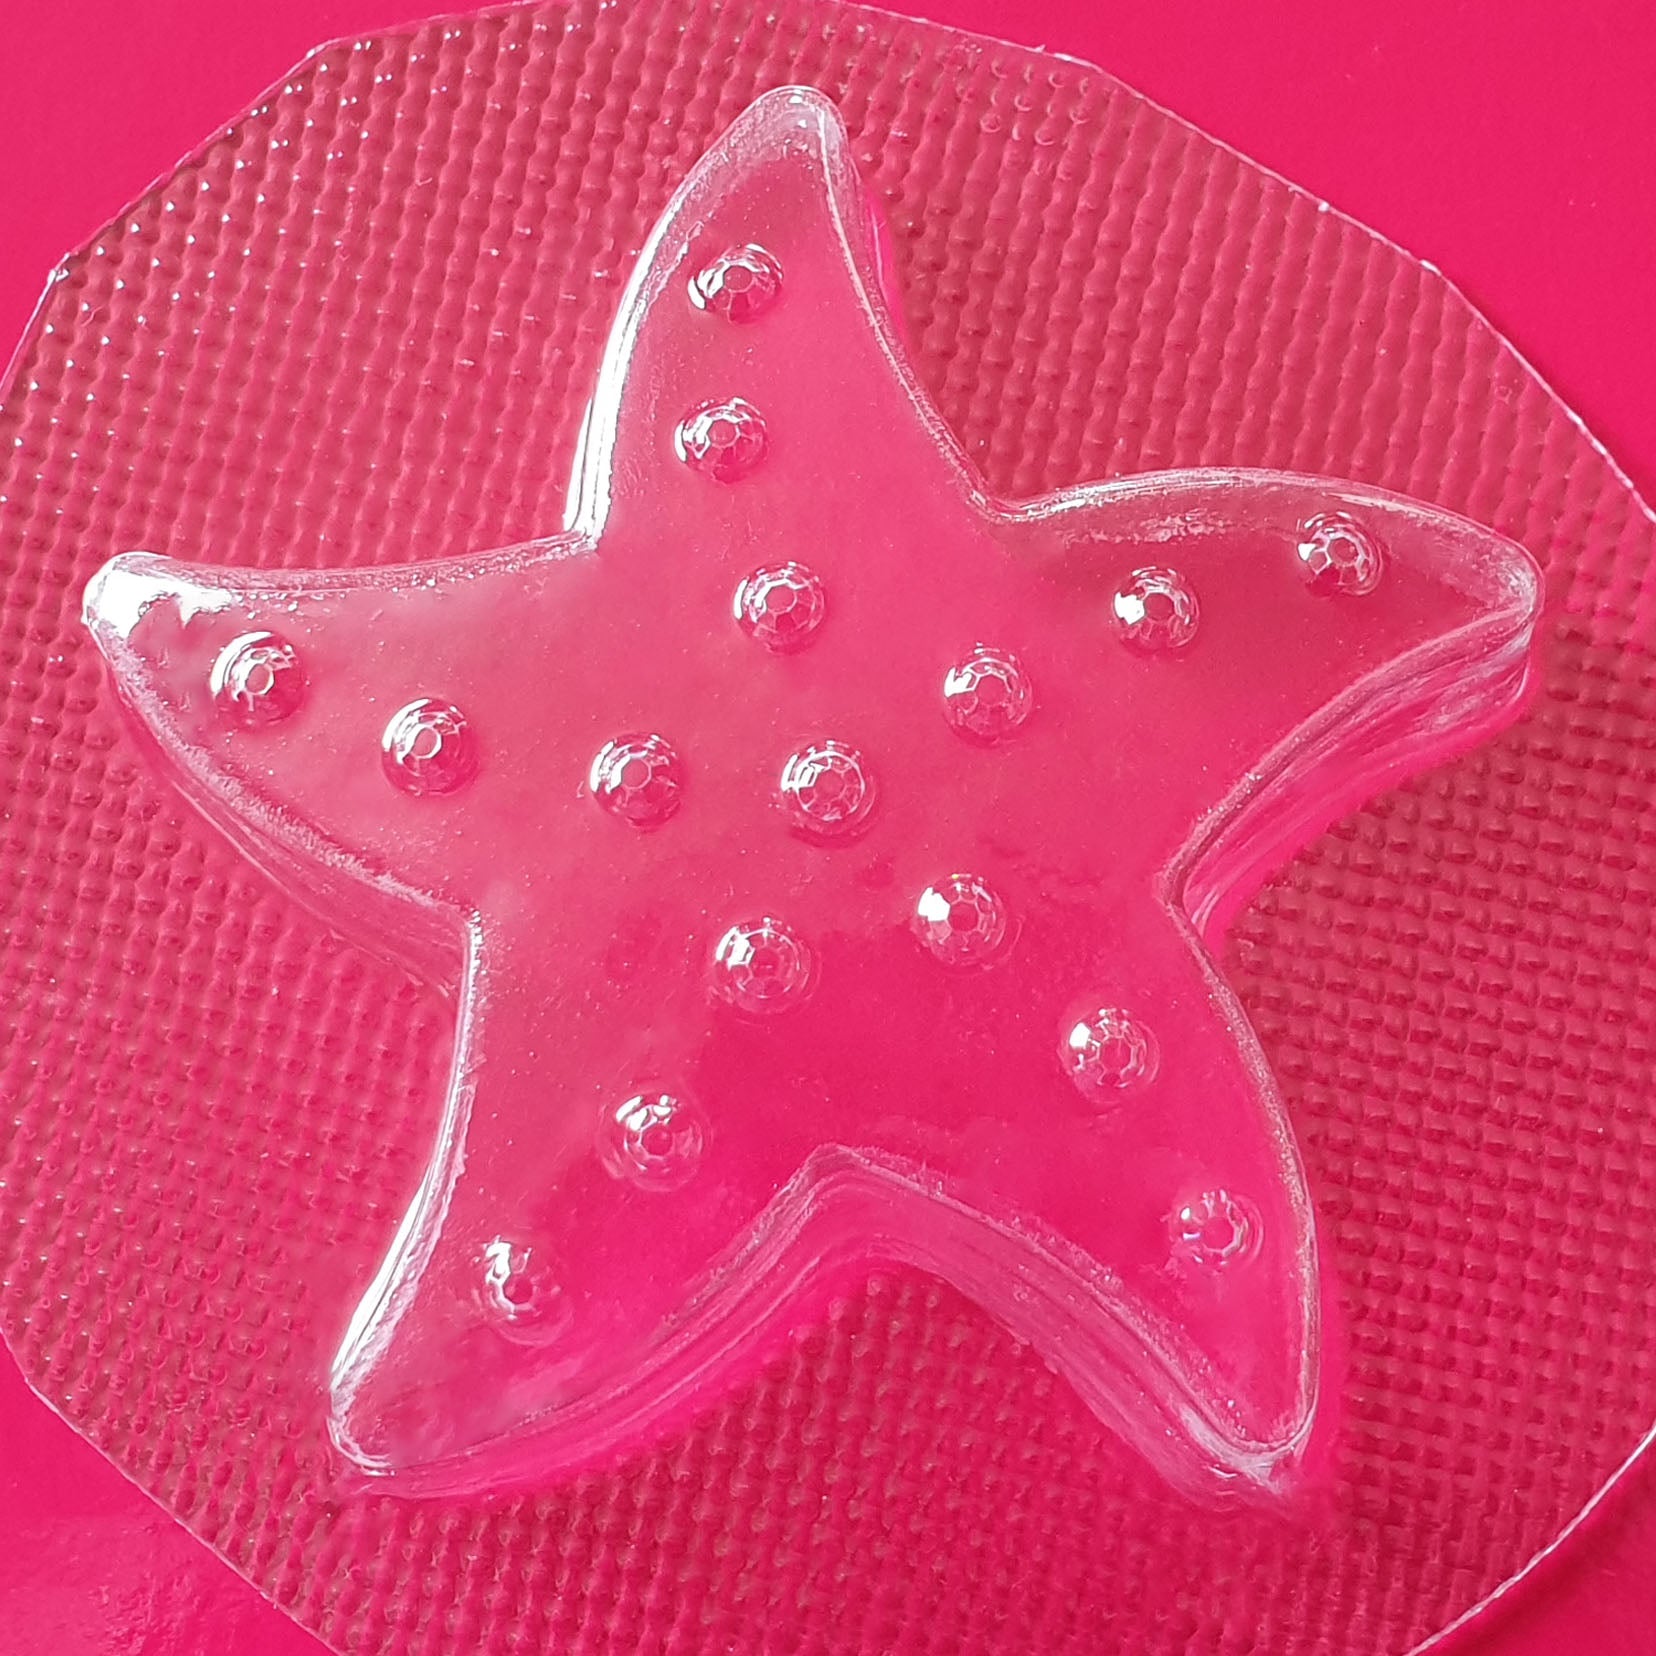 Starfish | Truly Personal | Bath Bomb, Soap, Resin, Chocolate, Jelly, Wax Melts Mold